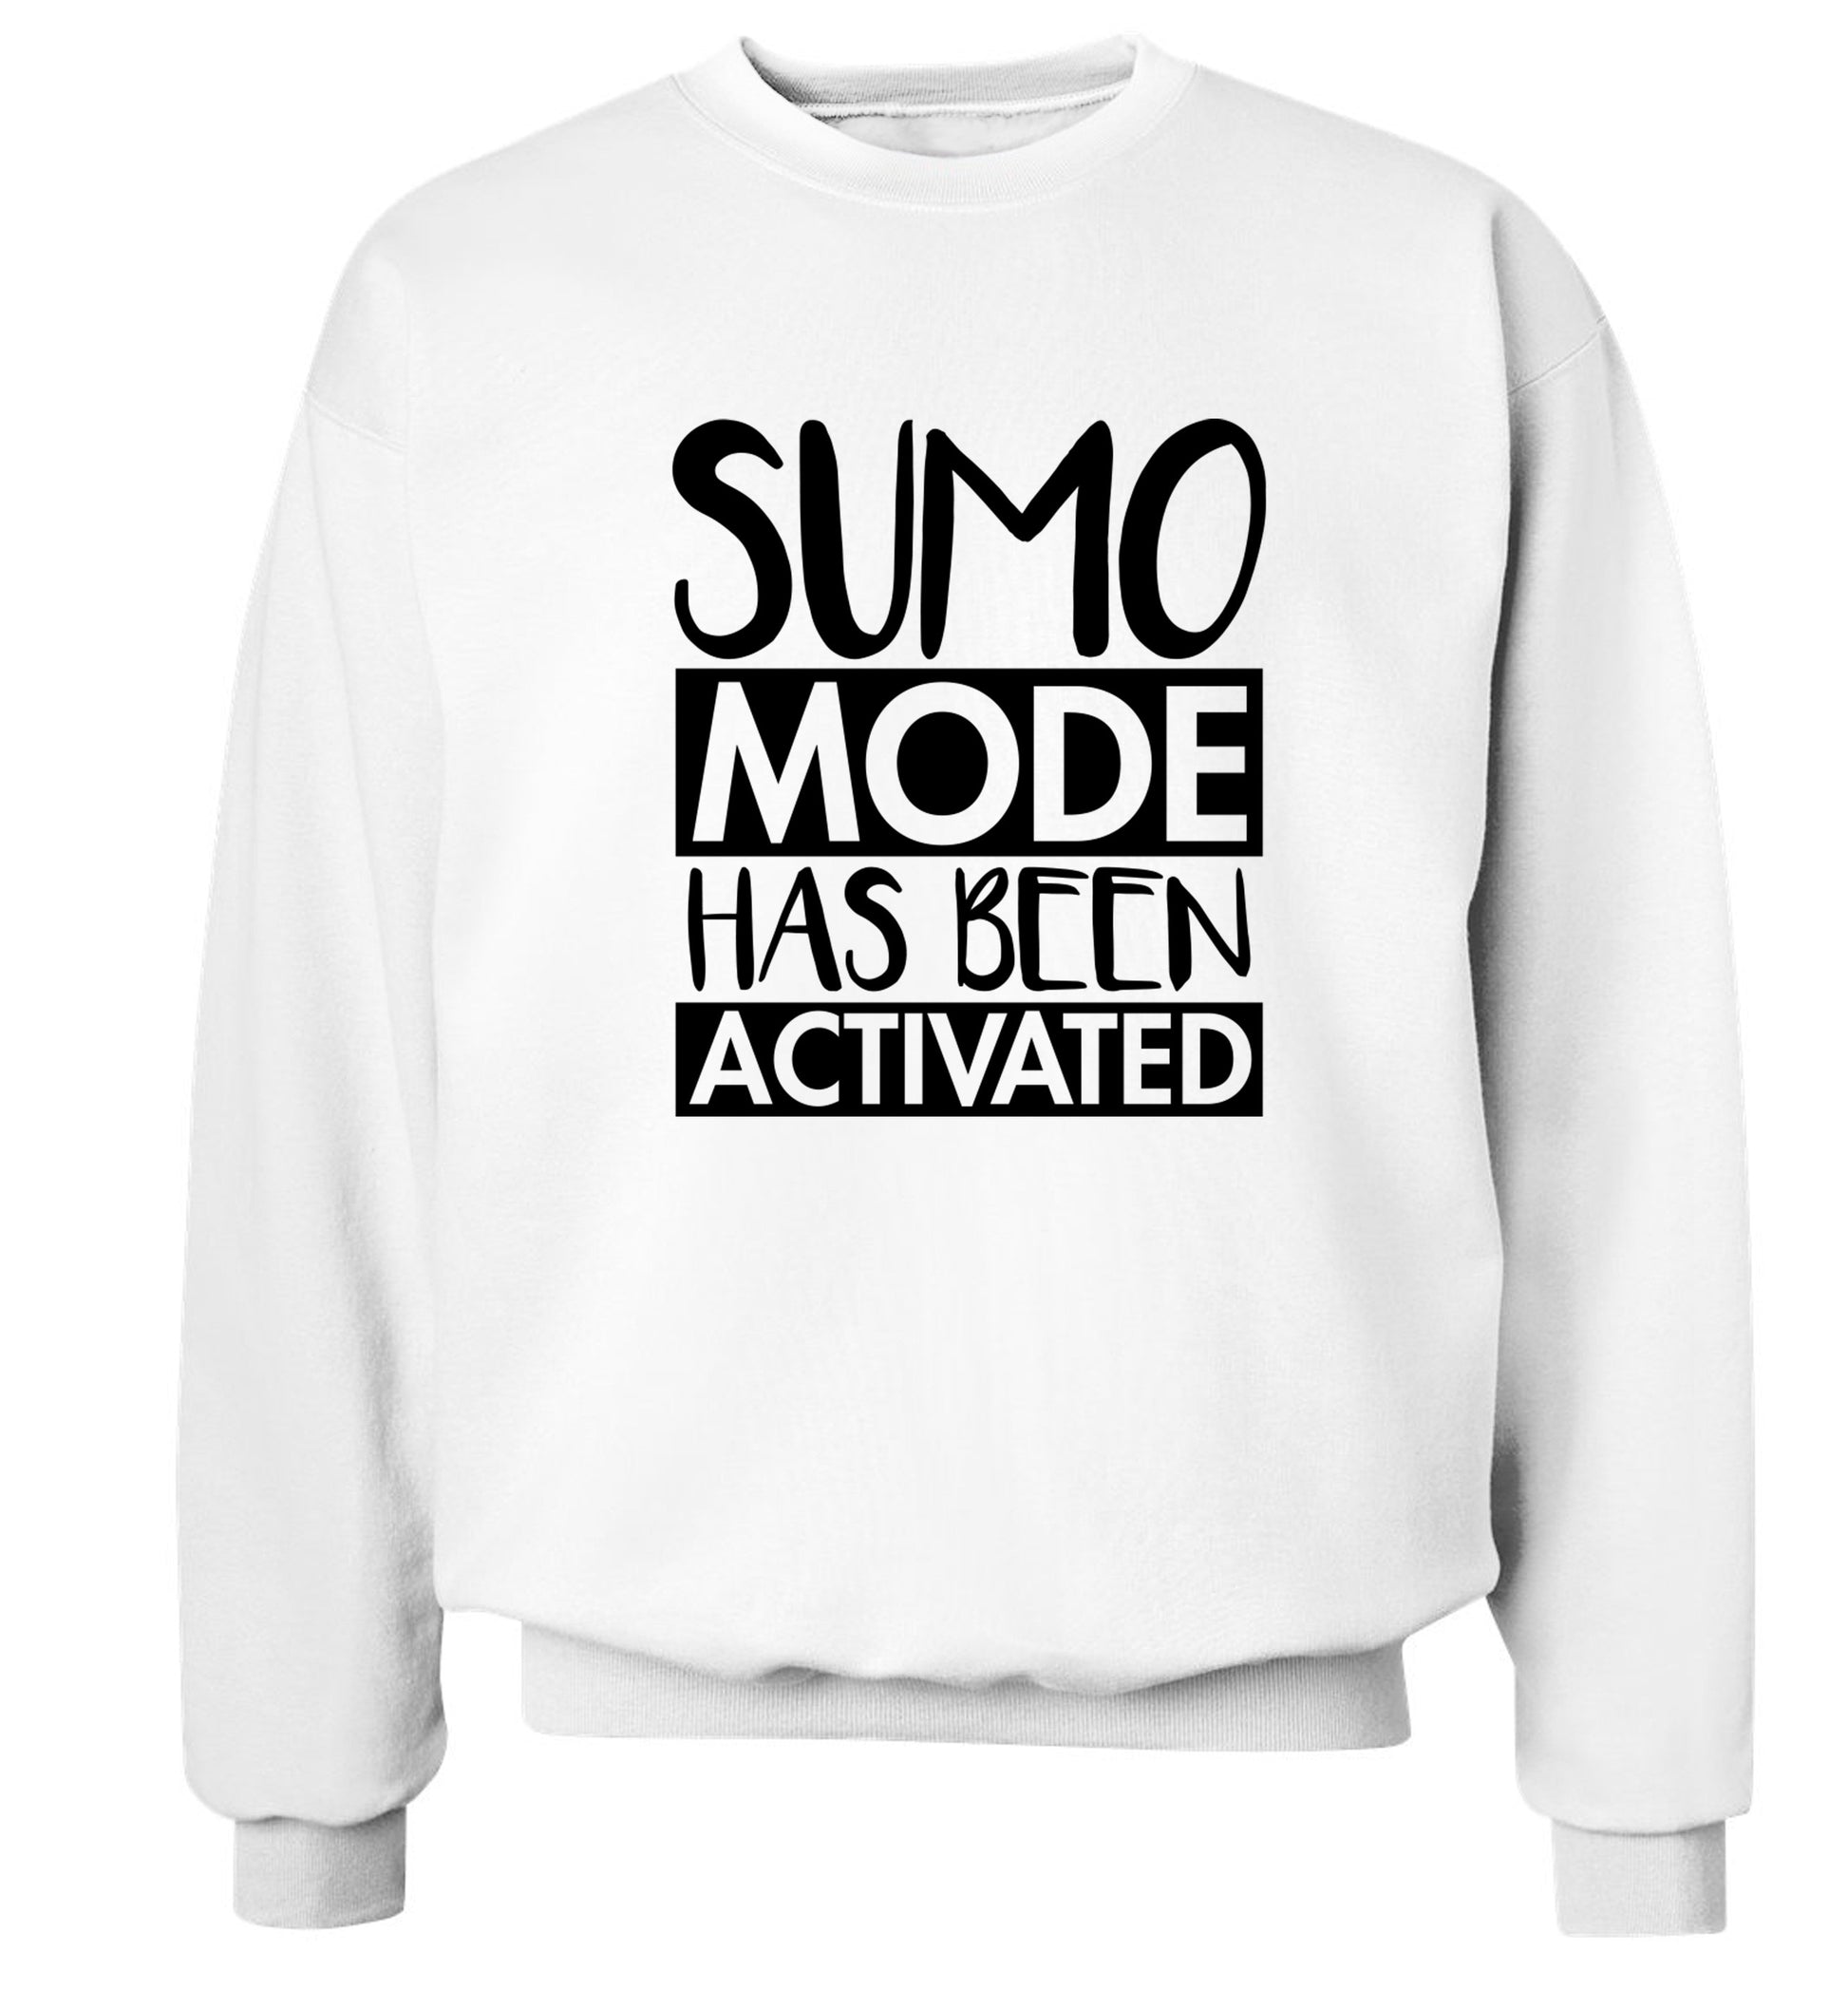 Sumo mode activated Adult's unisex white Sweater 2XL